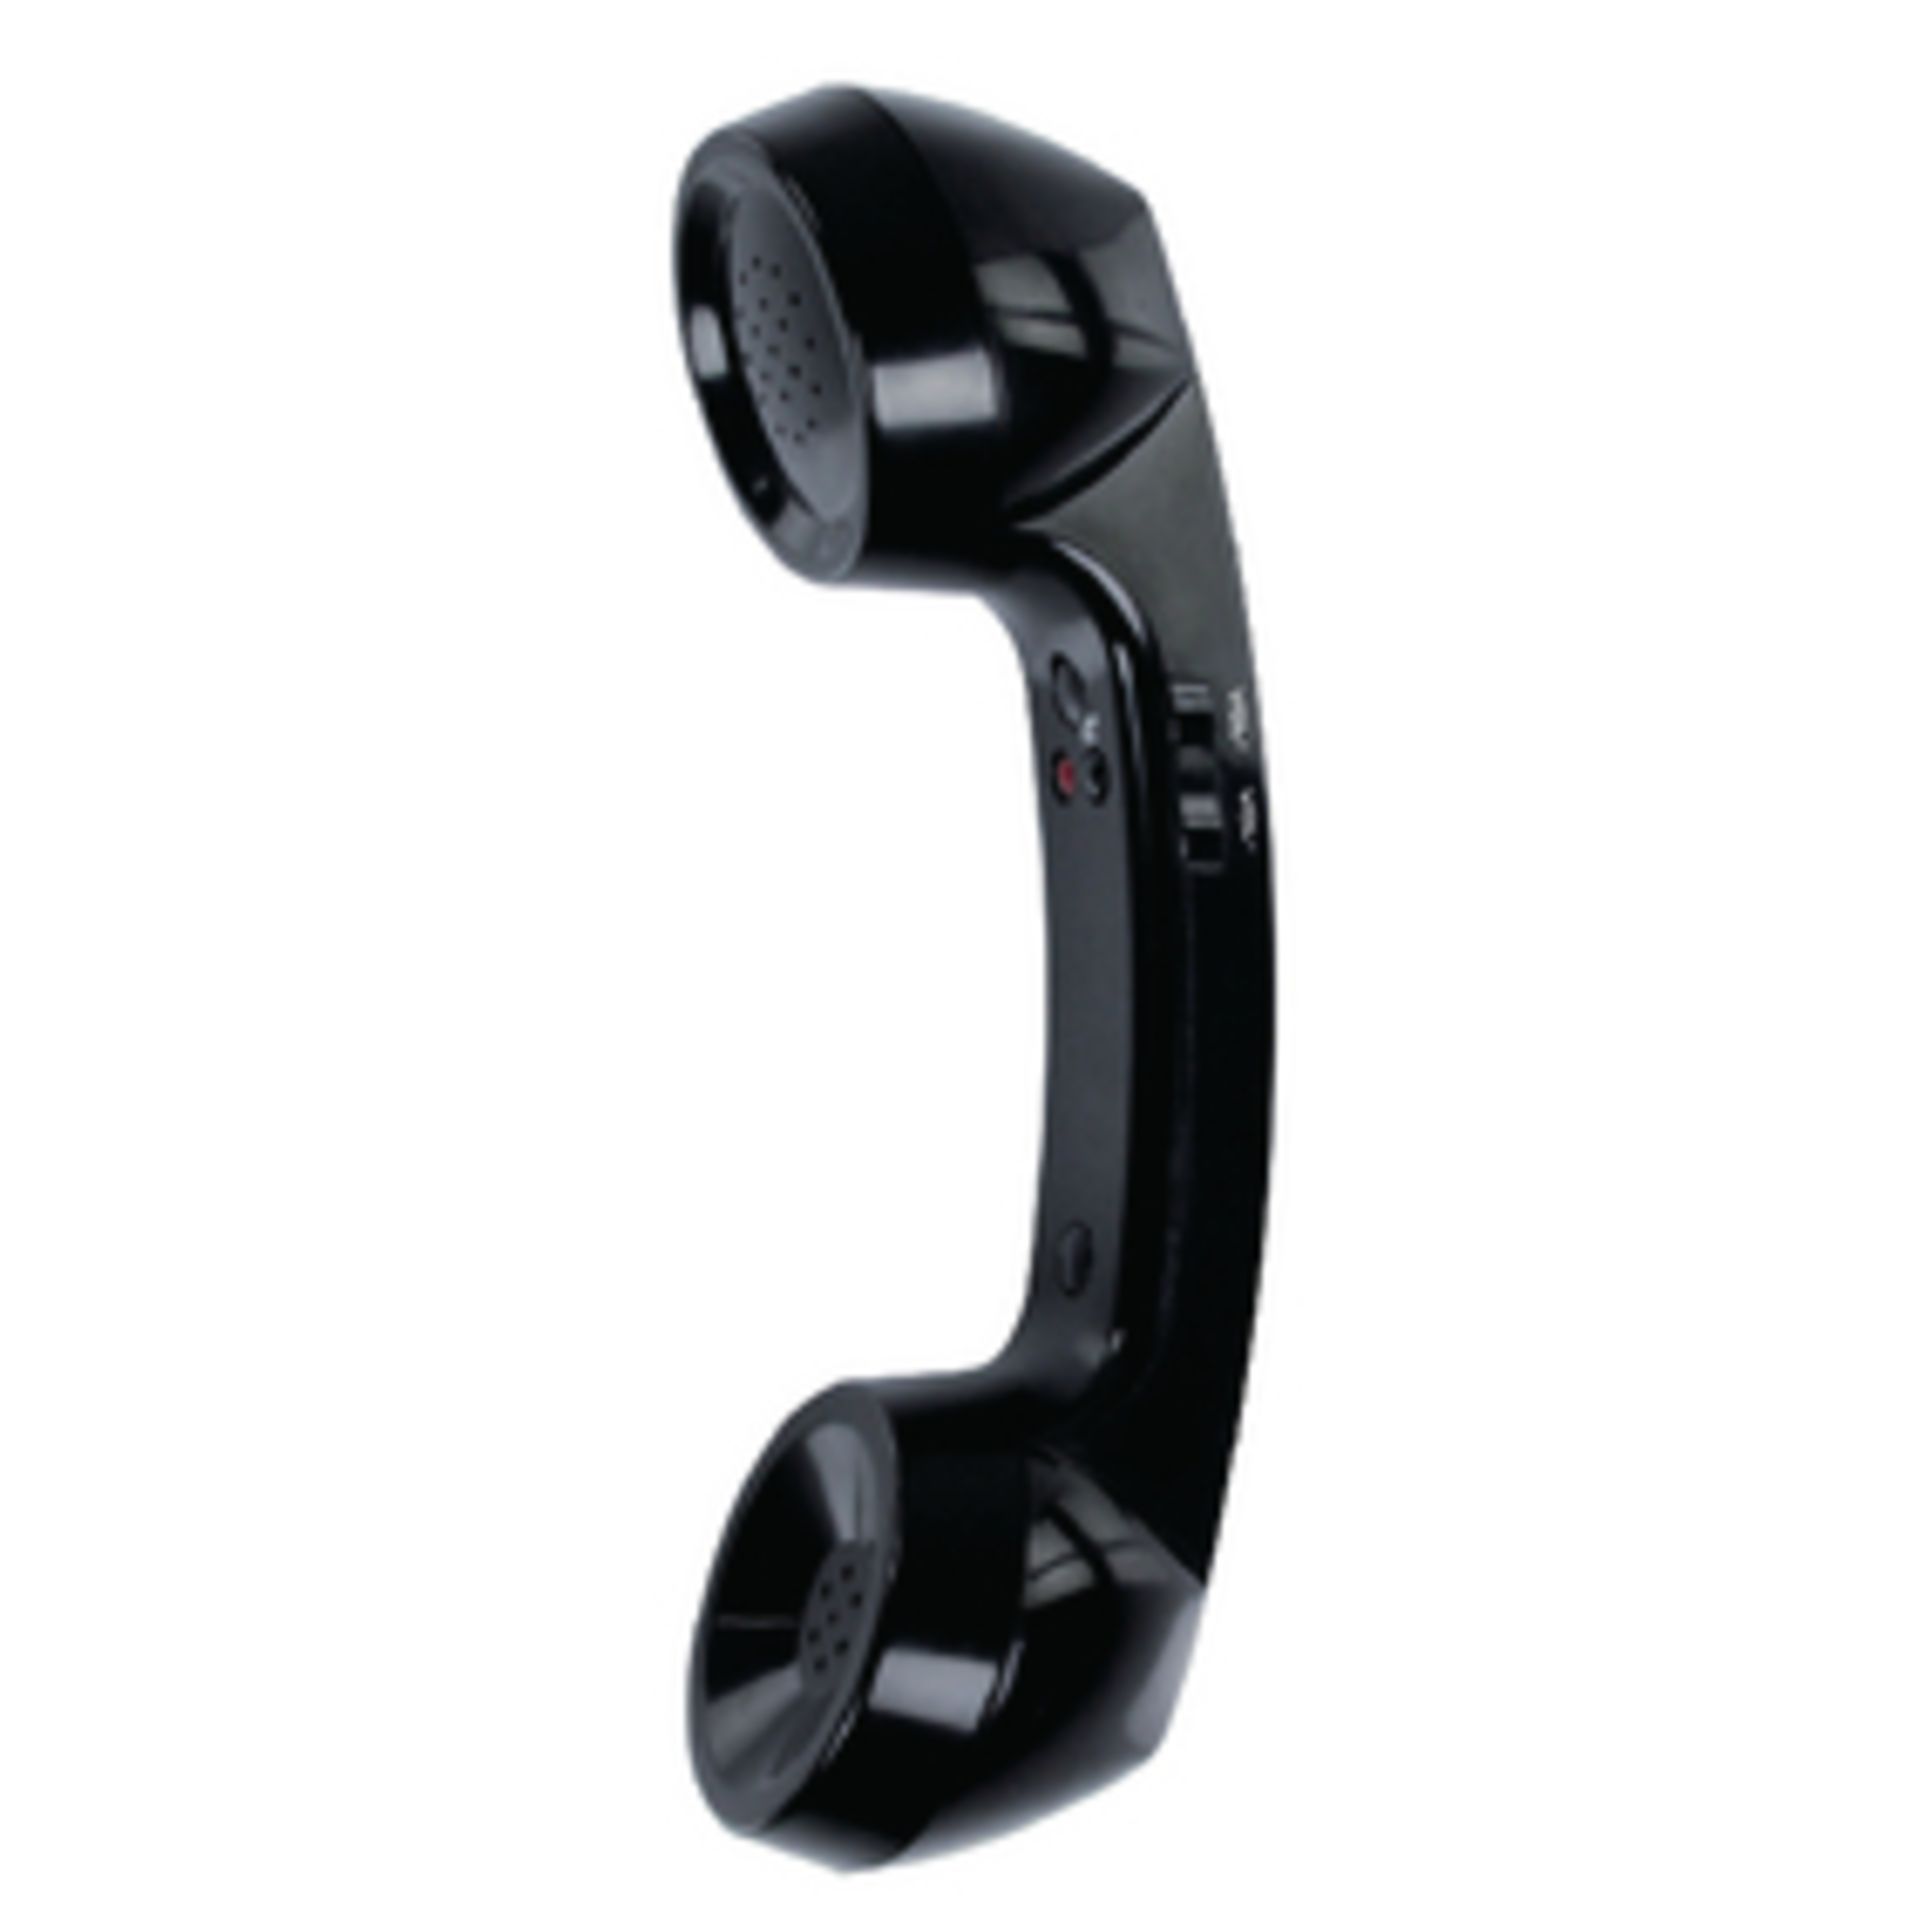 V Brand New Bluetooth Retro Telephone Handset with Charging Cable - Simply Connects To Your Phone - Image 2 of 2